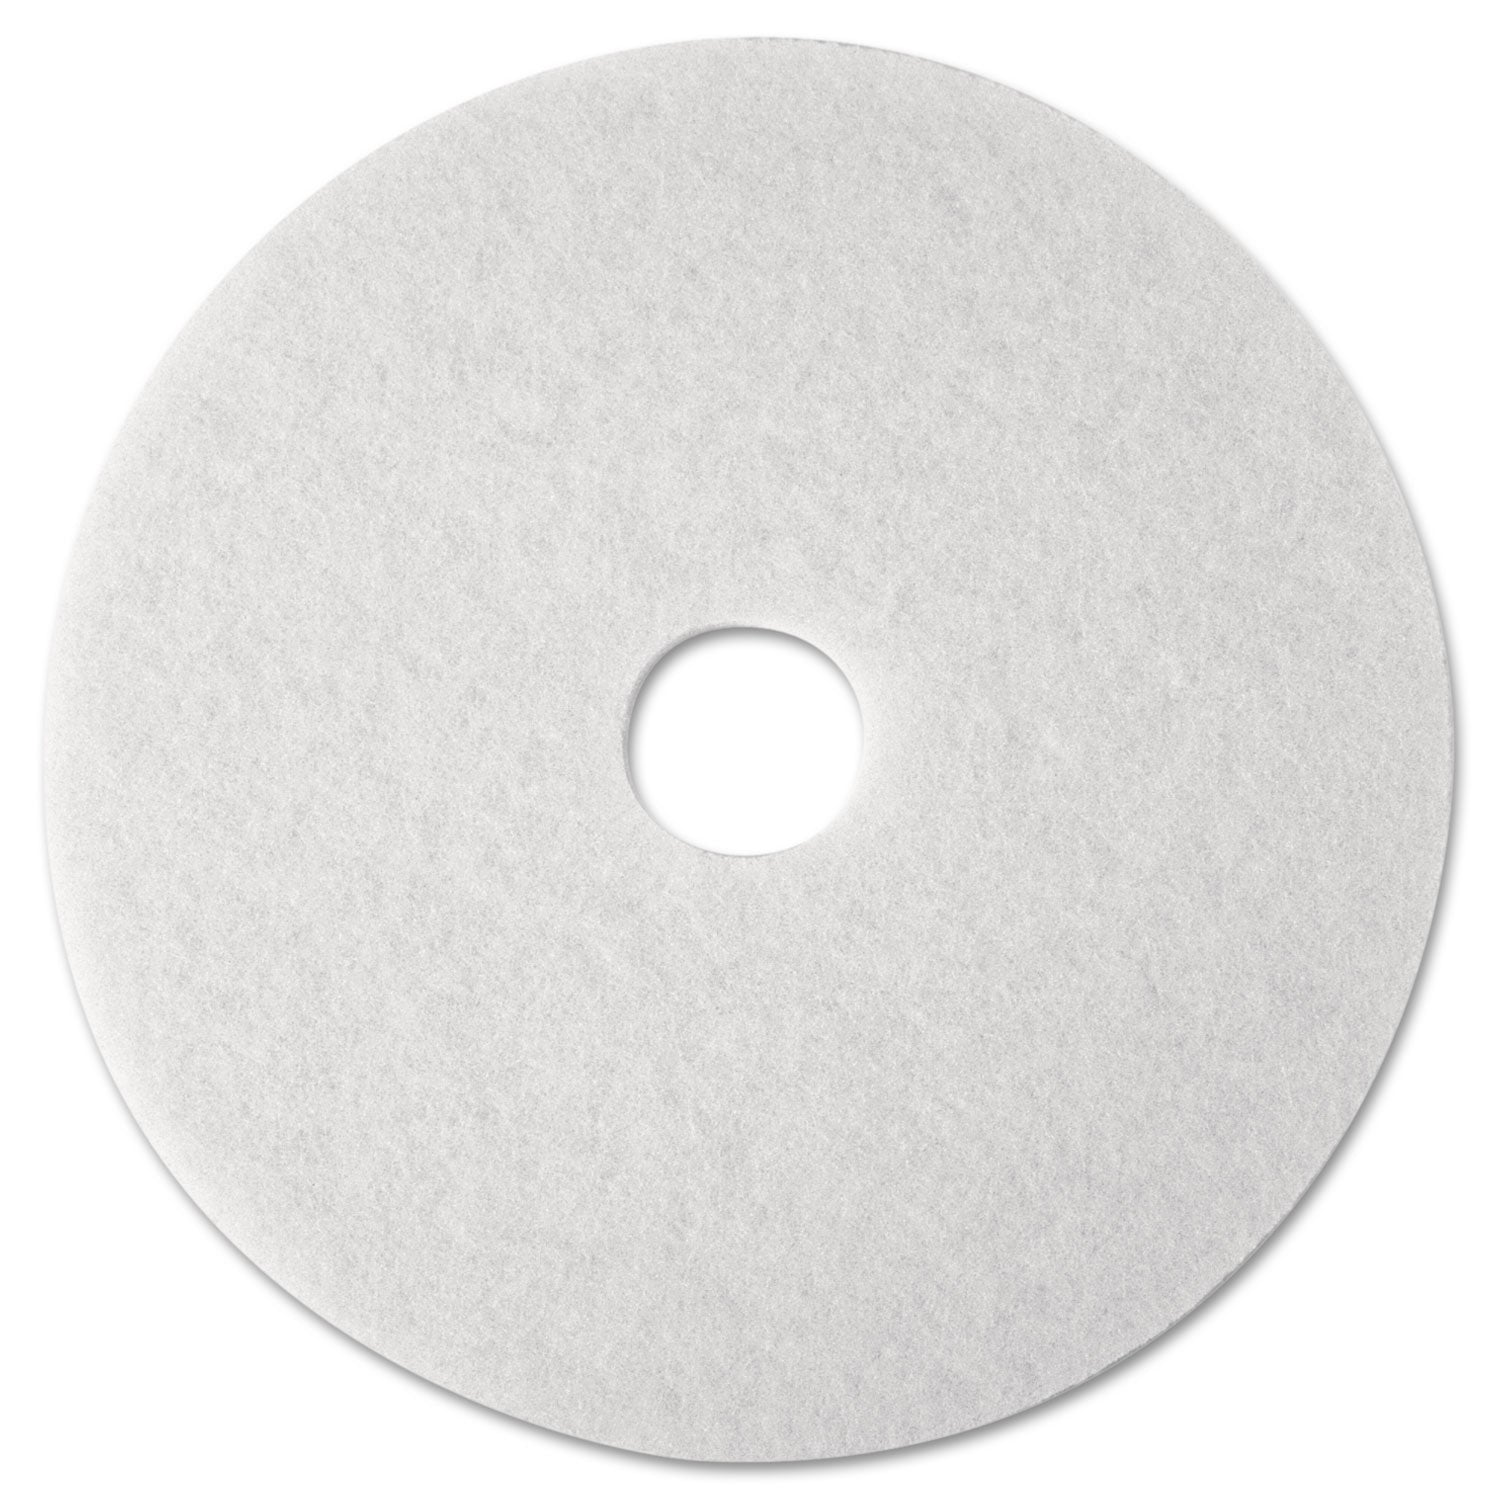 3M White Super Polish Pads - 5/Carton - Round x 12" Diameter - Polishing, Floor, Buffing, Scrubbing - Wood Floor - 175 rpm to 600 rpm Speed Supported - Textured, Adhesive, Durable, Scuff Mark Remover, Heel Mark Remover - Polyester Fiber - White - 1